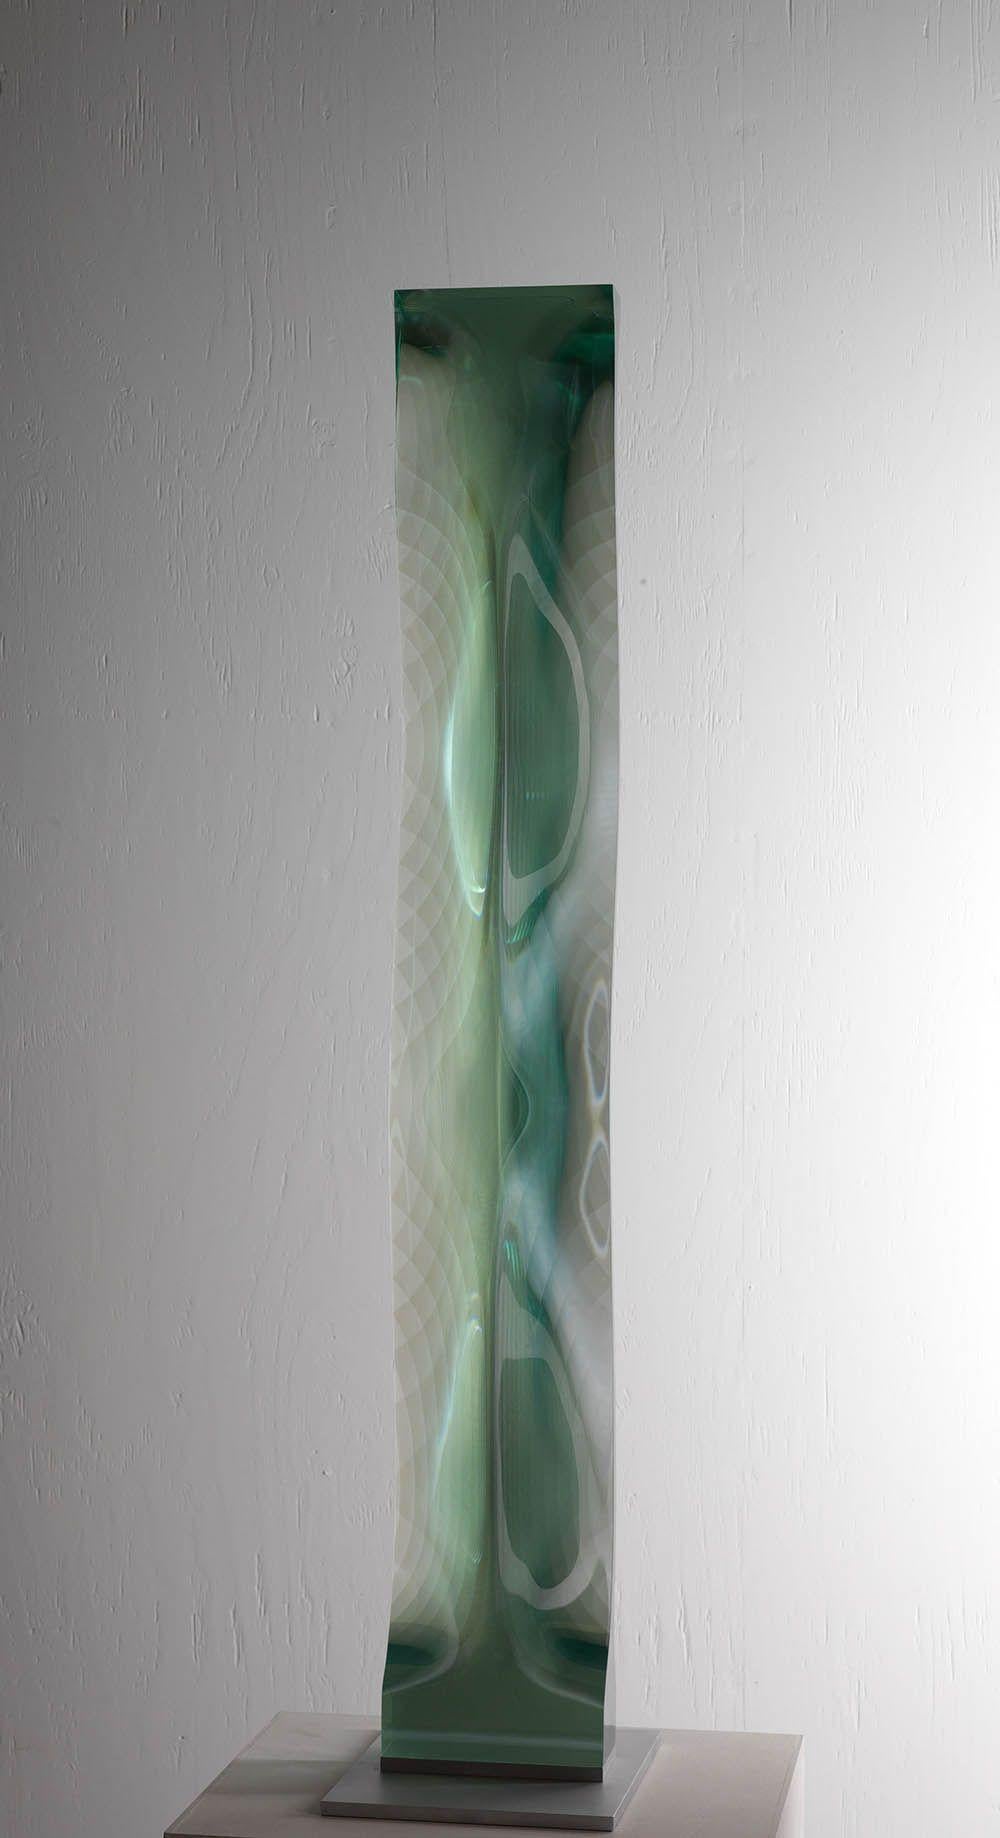 M.080601 by Toshio Iezumi - Contemporary glass sculpture, green, abstract, long For Sale 4